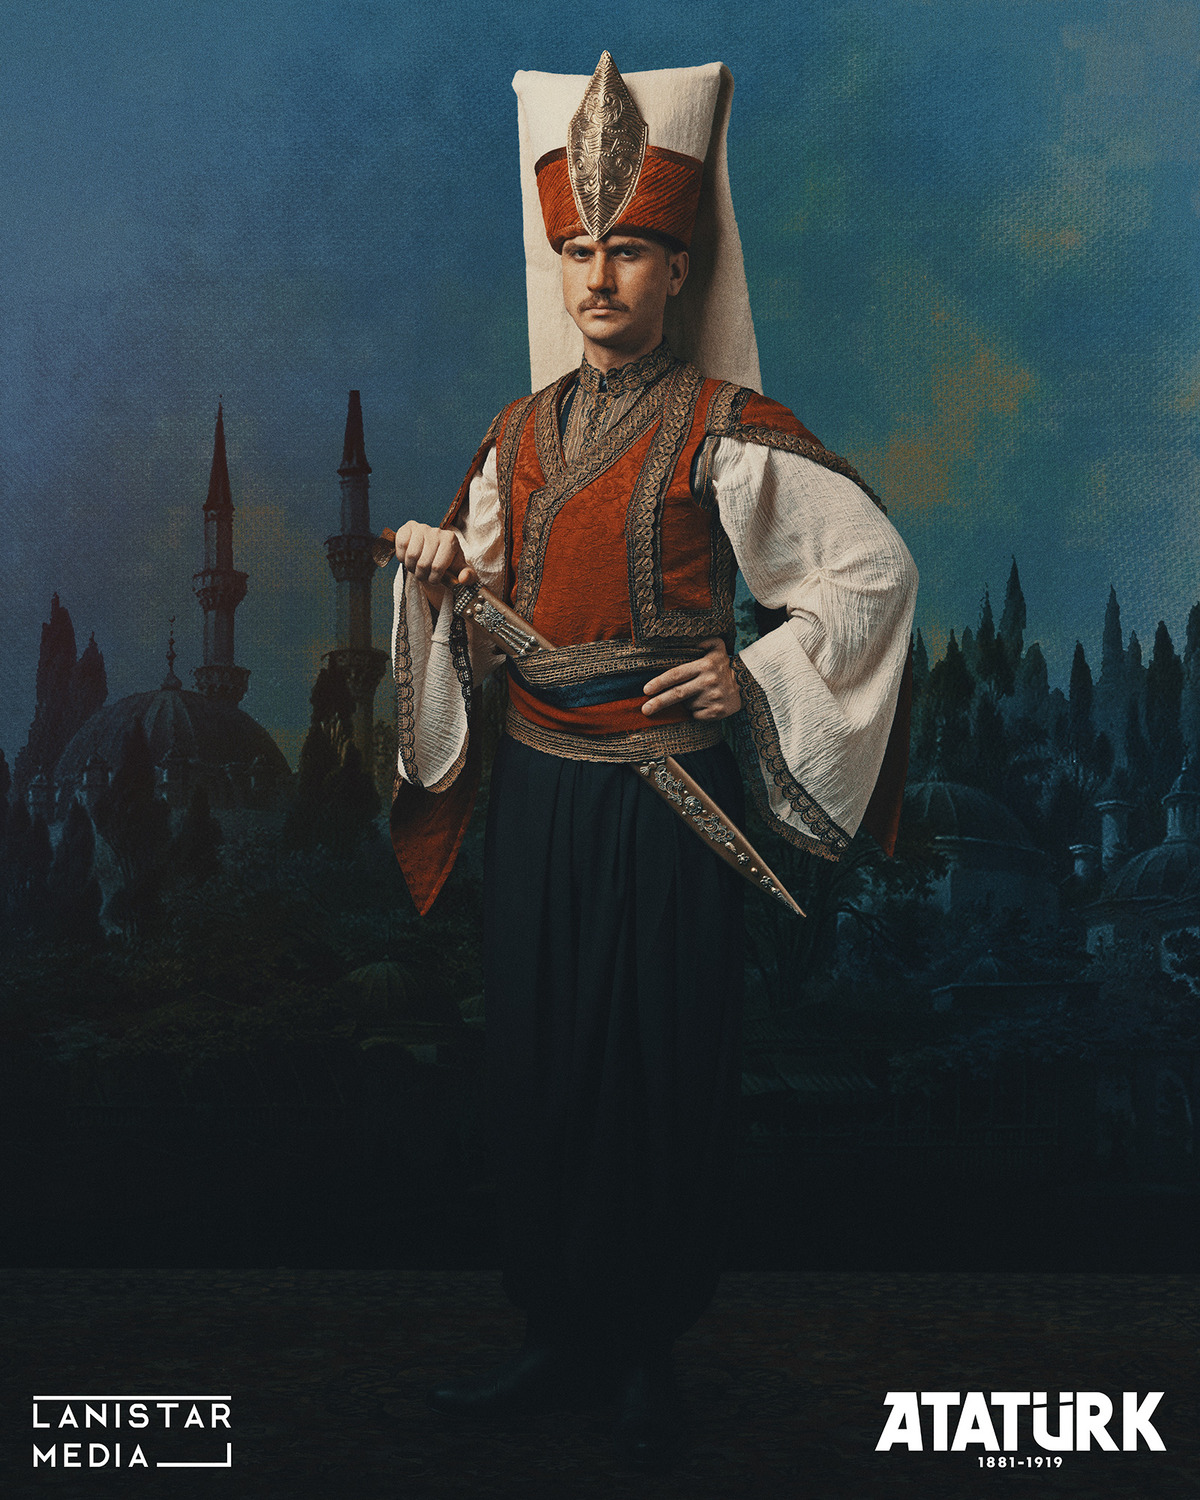 Extra Large TV Poster Image for Atatürk 1881 - 1919 (#10 of 11)